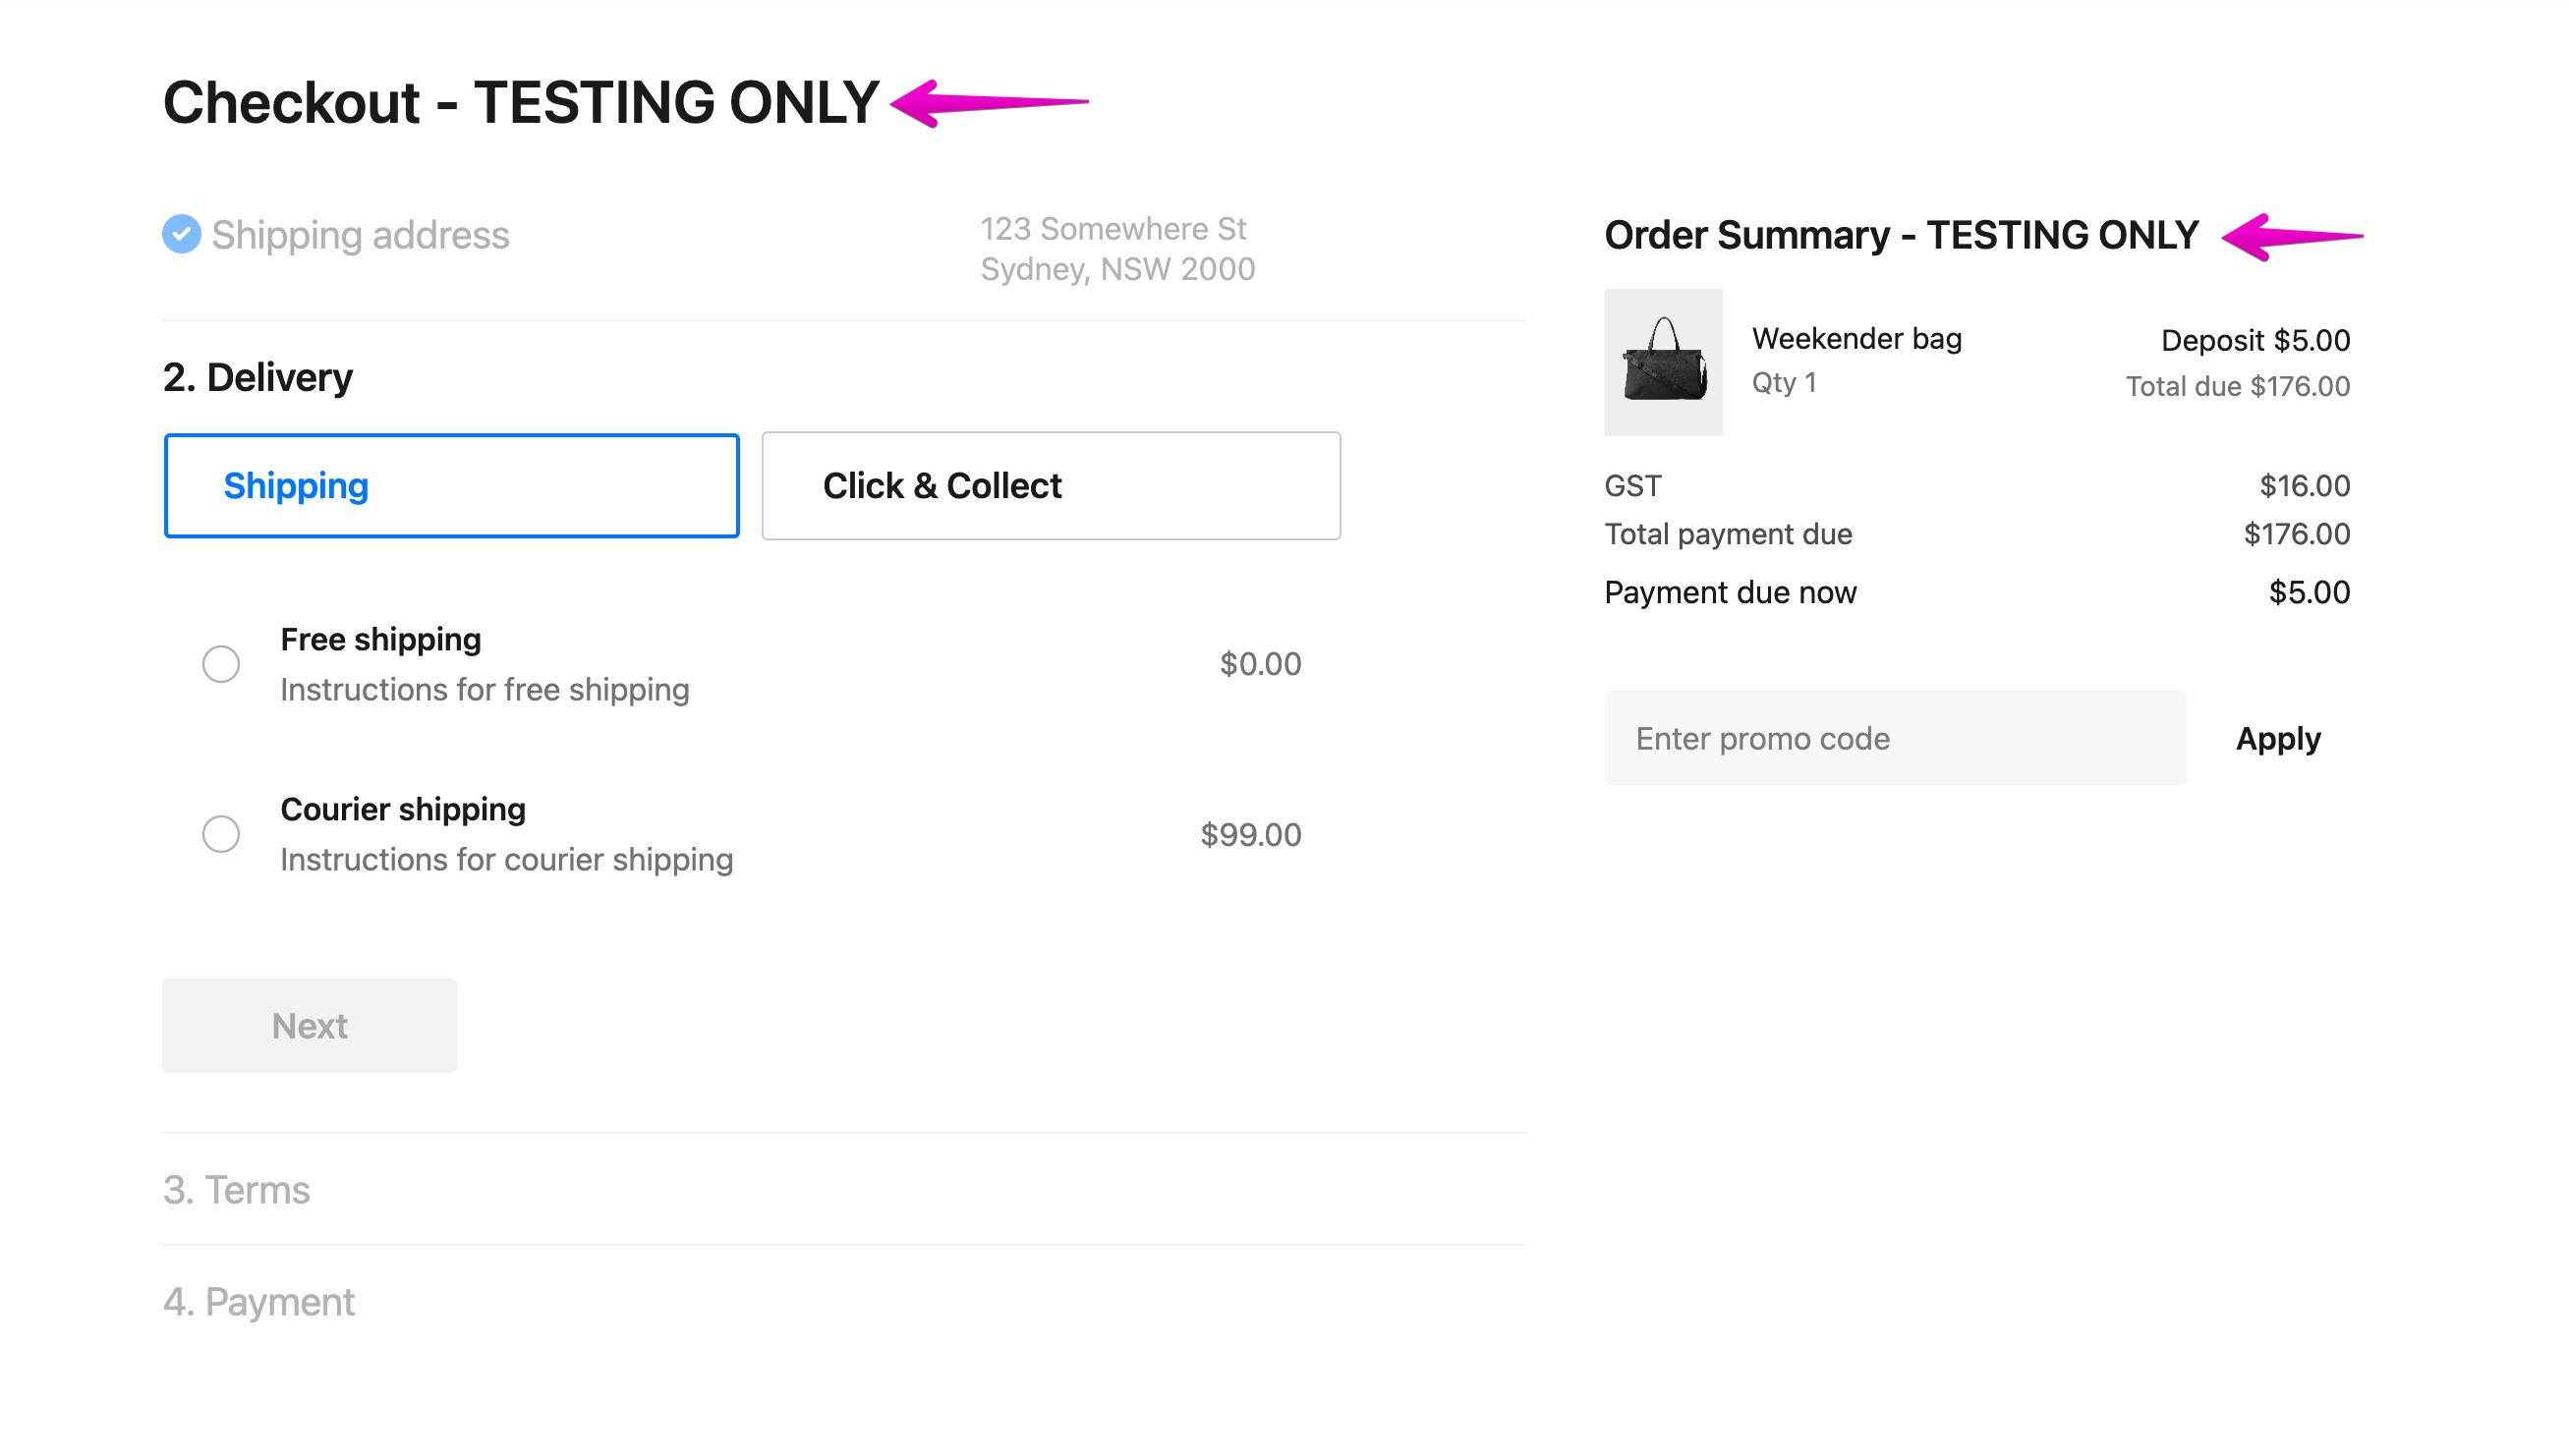 Test Order Checkout showing TESTING ONLY on the page